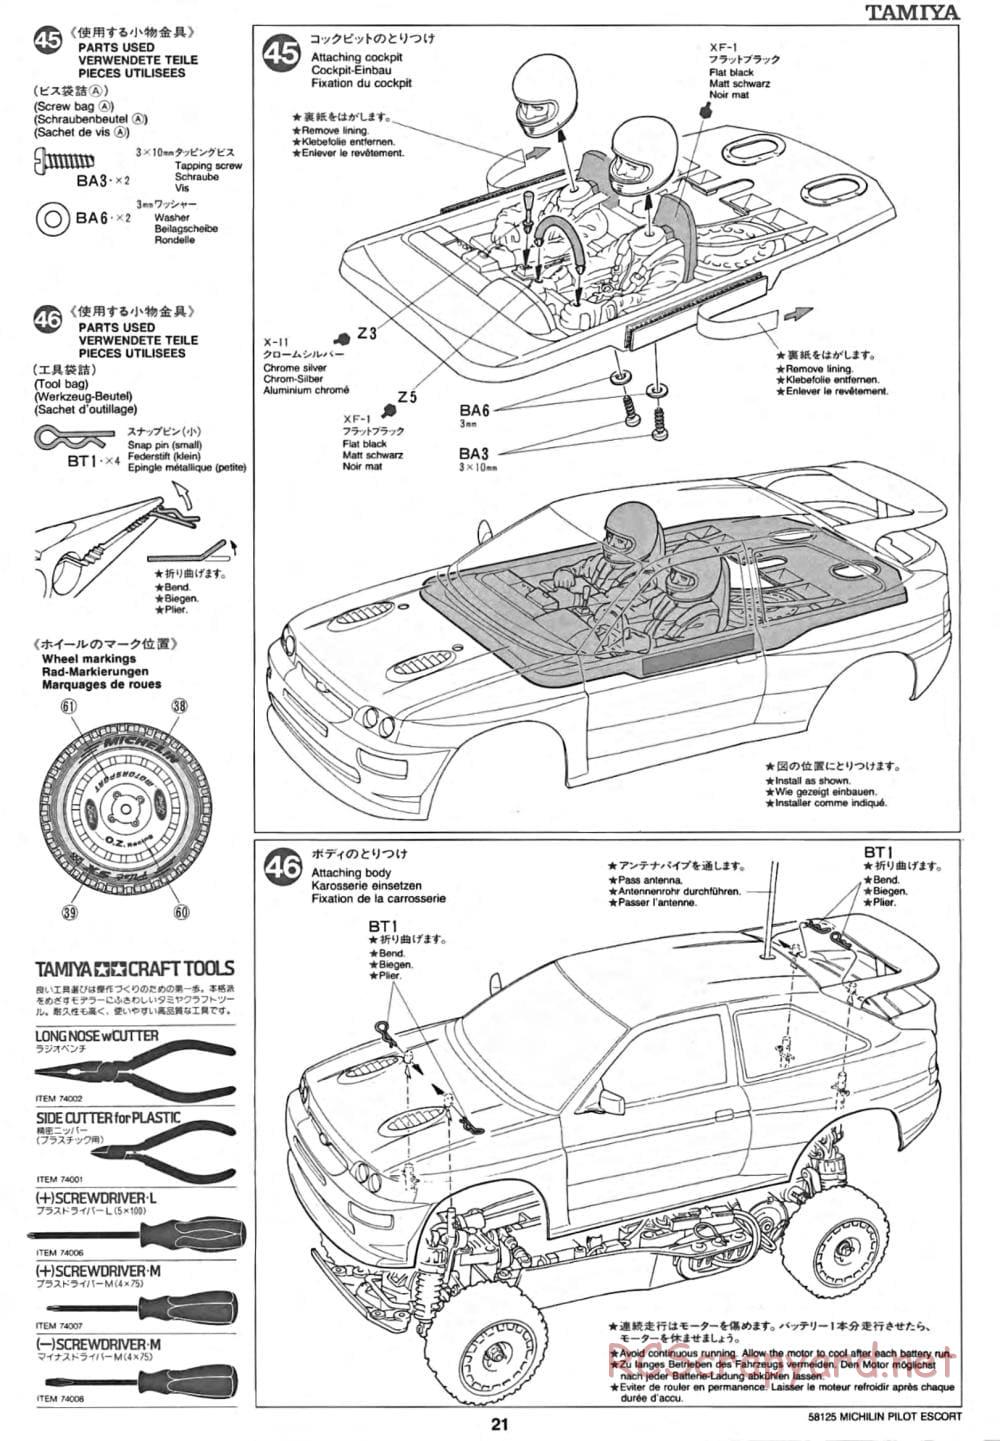 Tamiya - Michelin Pilot Ford Escort RS Cosworth - TA-01 Chassis - Manual - Page 22